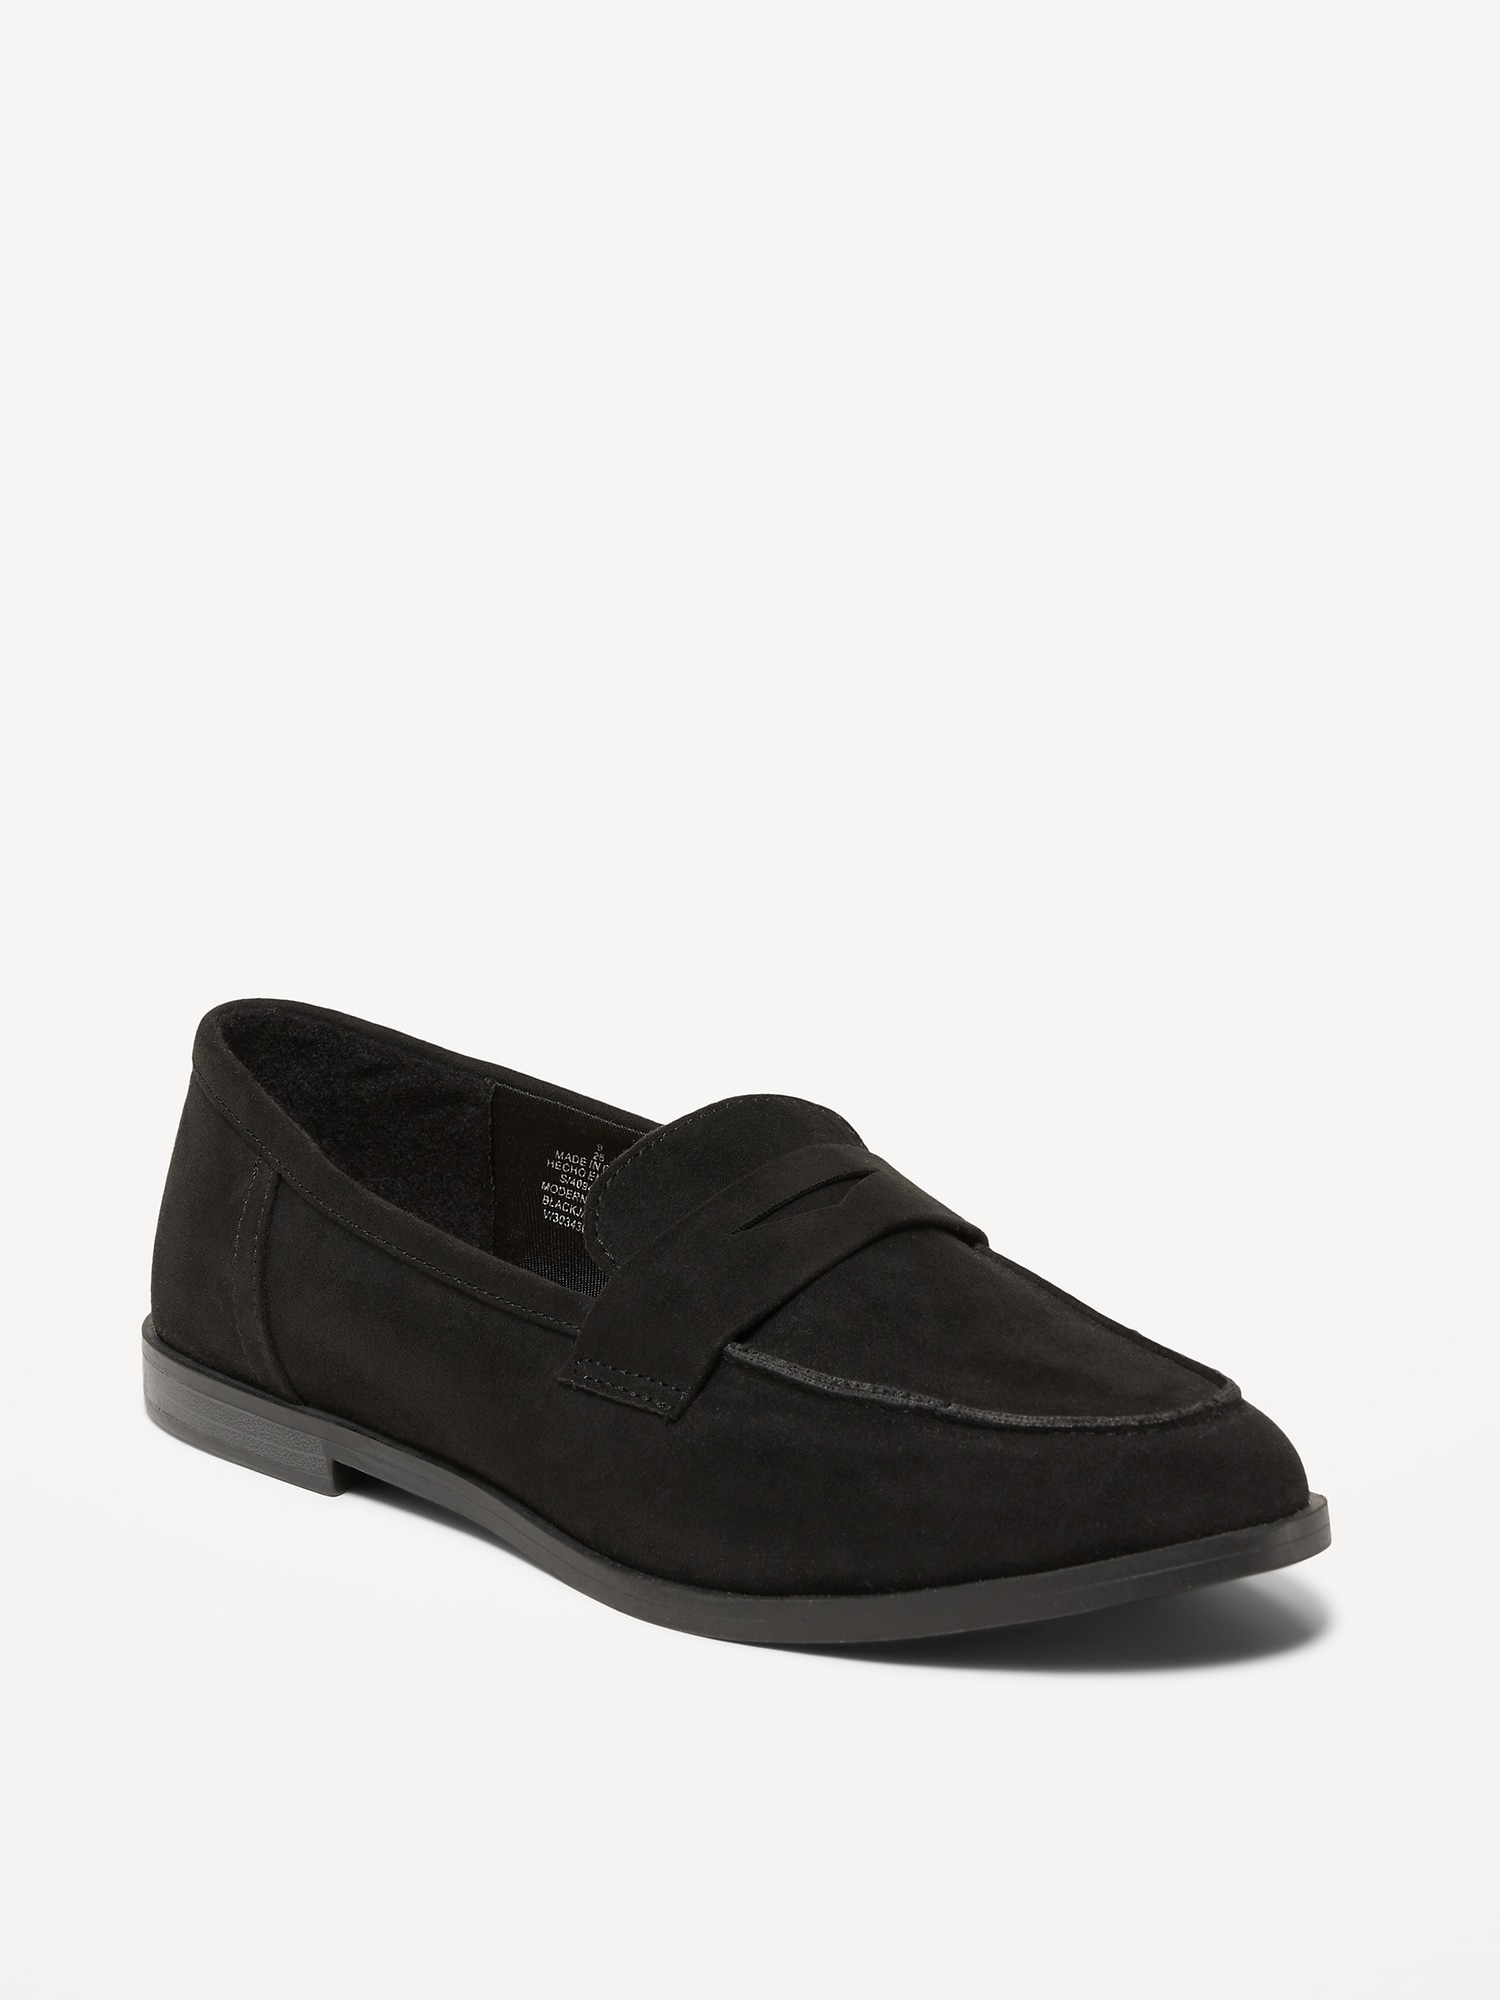 Faux-Suede Penny Loafer Shoes